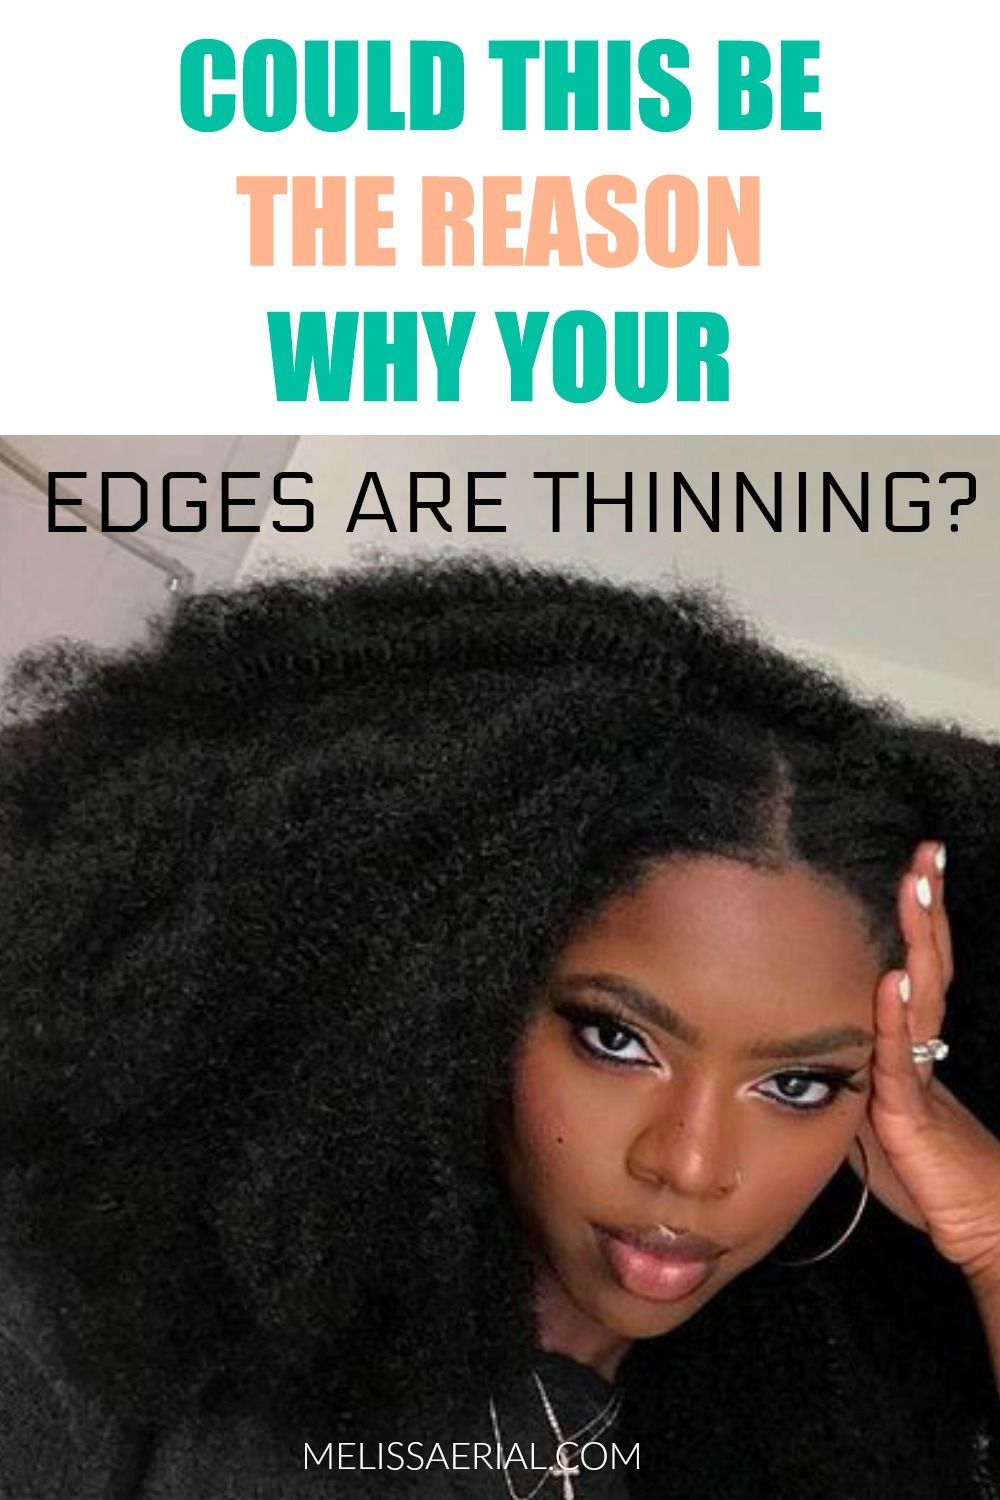 Get Practical Tips To Regrow Your Thinning Edges Fast